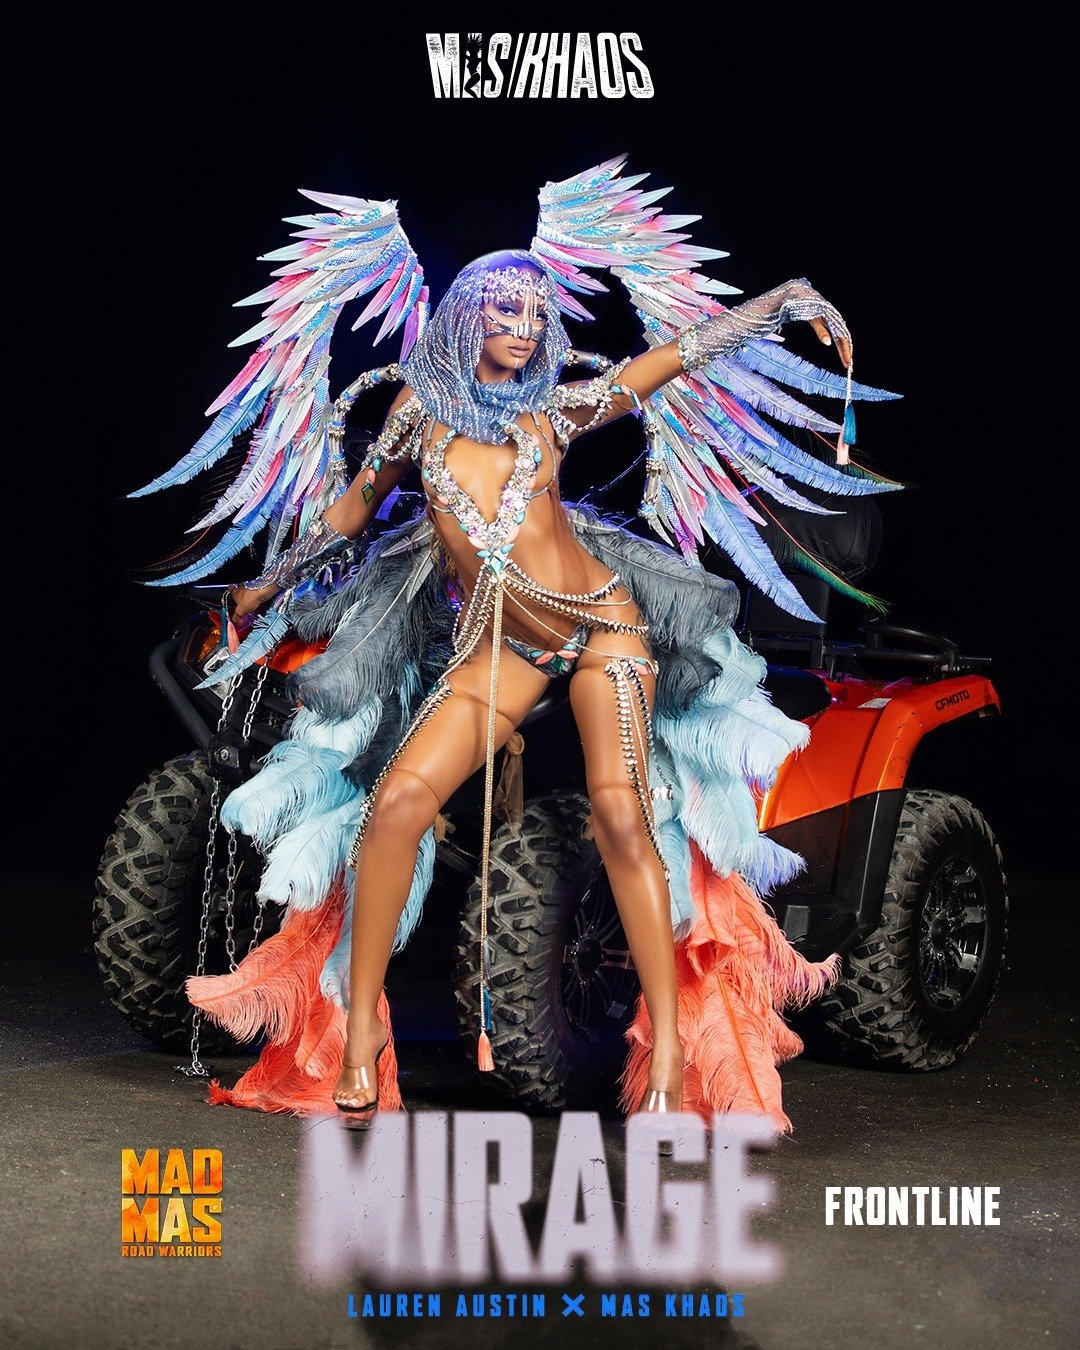 We may be out of wings, but we have a limited quantity of costume options left - be sure to check the link in our bio to see what's still in stock 🔥

Get lost in MIRAGE by @laurenxaustin x Mas Khaos!

Final payment deadline (all sections): May 4

📸